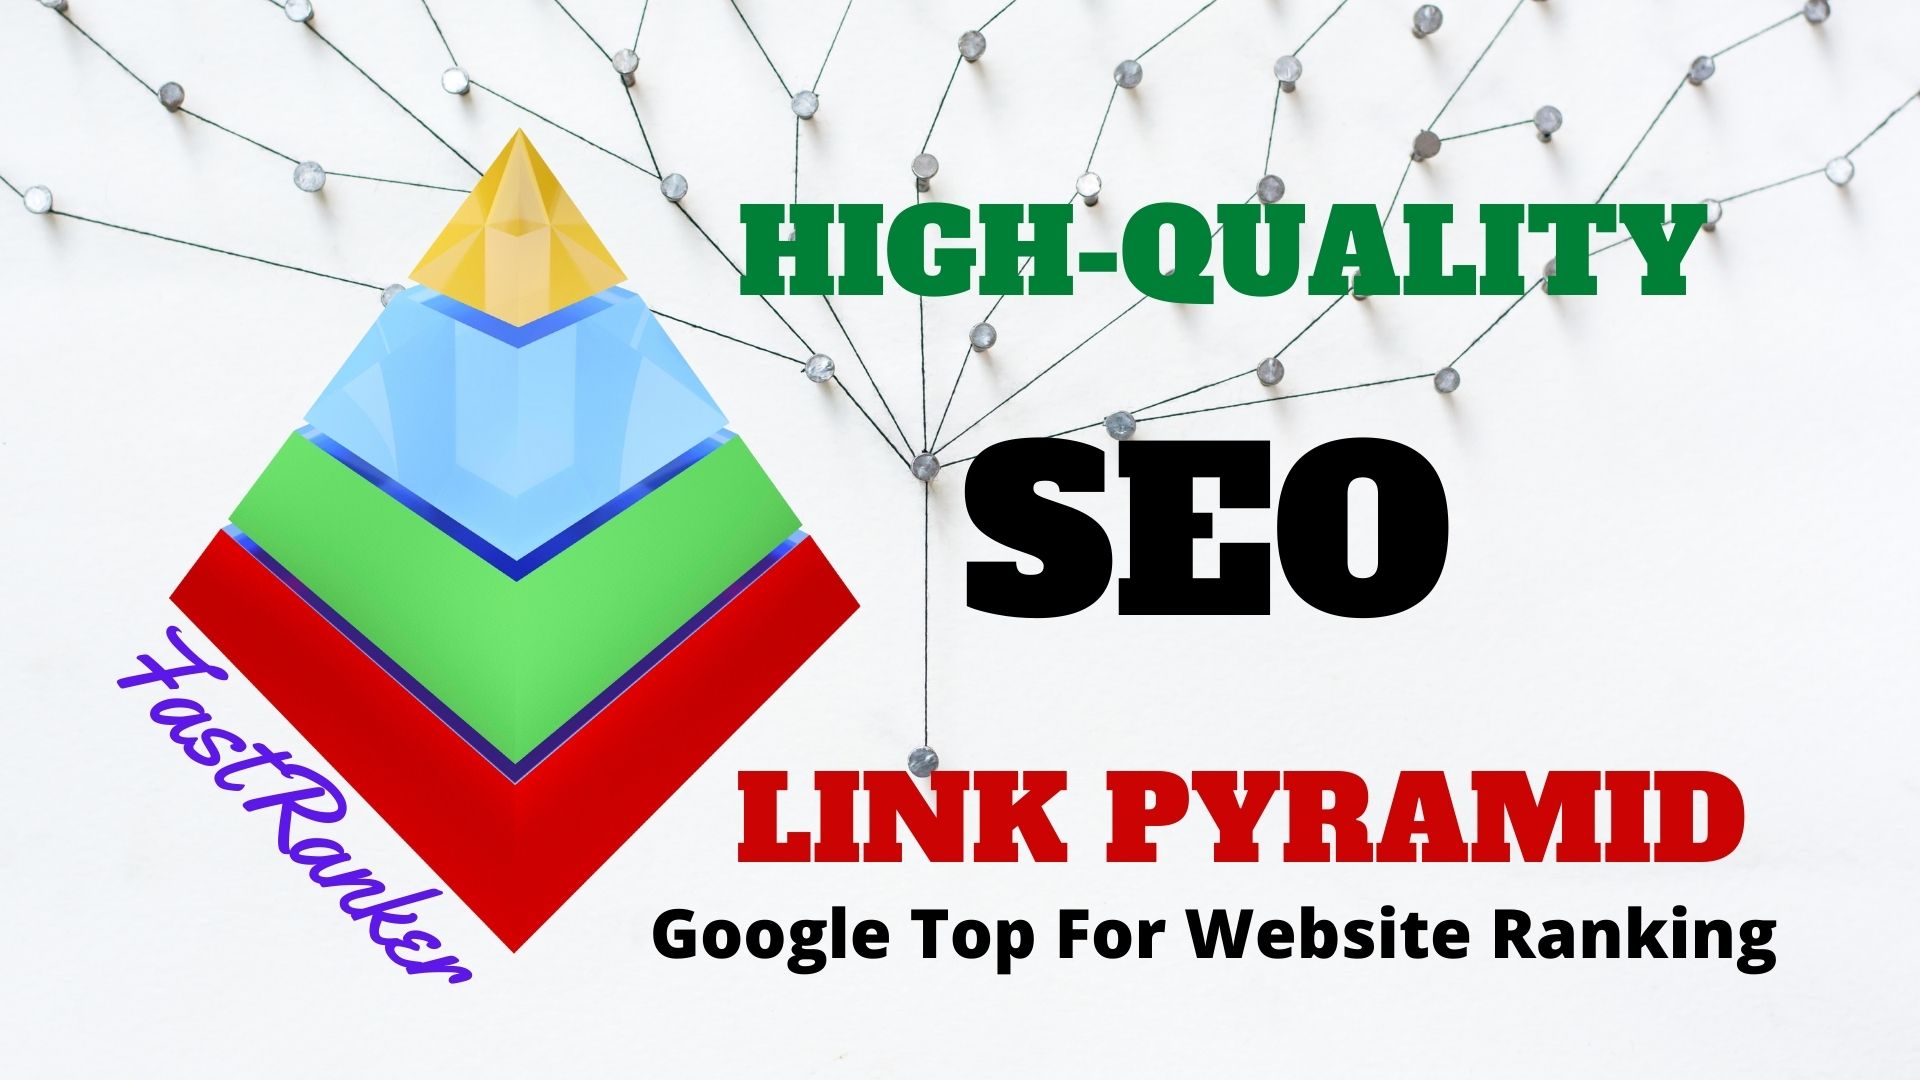 New Poker Casino ﻿﻿High-quality SEO Link Pyramid To Google Top Website For Ranking 